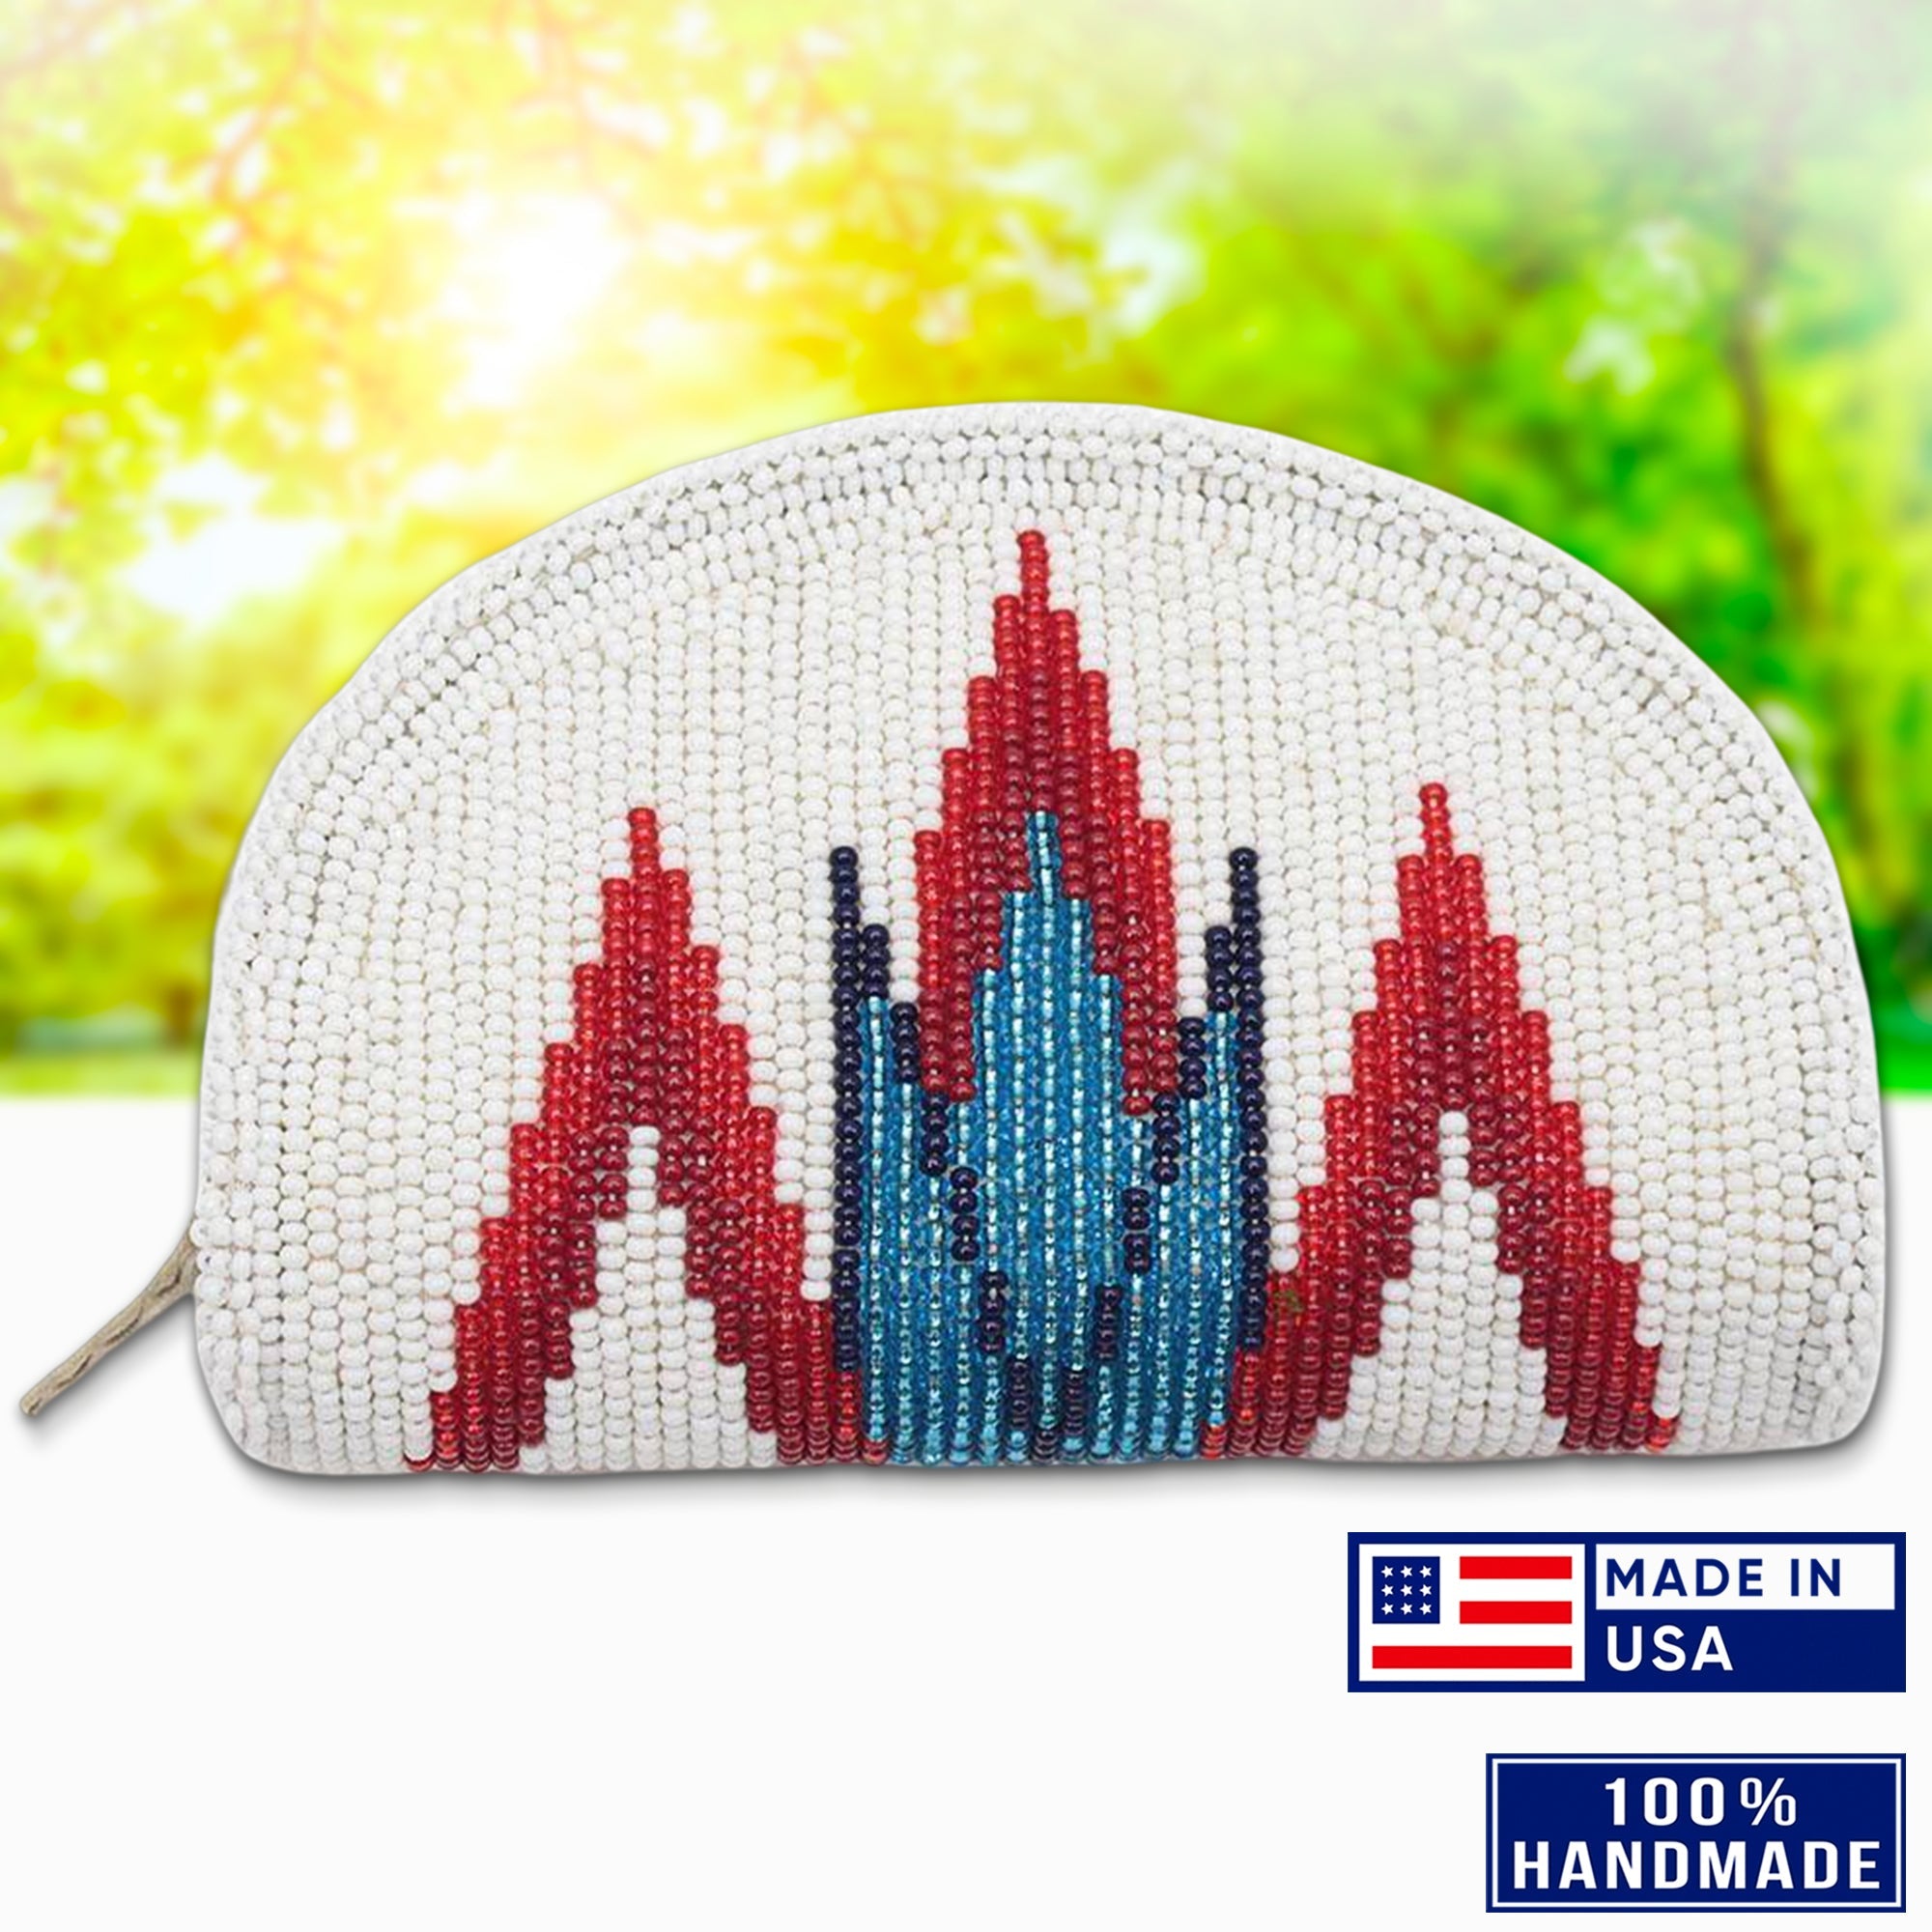 Native Inspired Ethnic Style White Red Seed Bead Beaded Coin Purse IBL